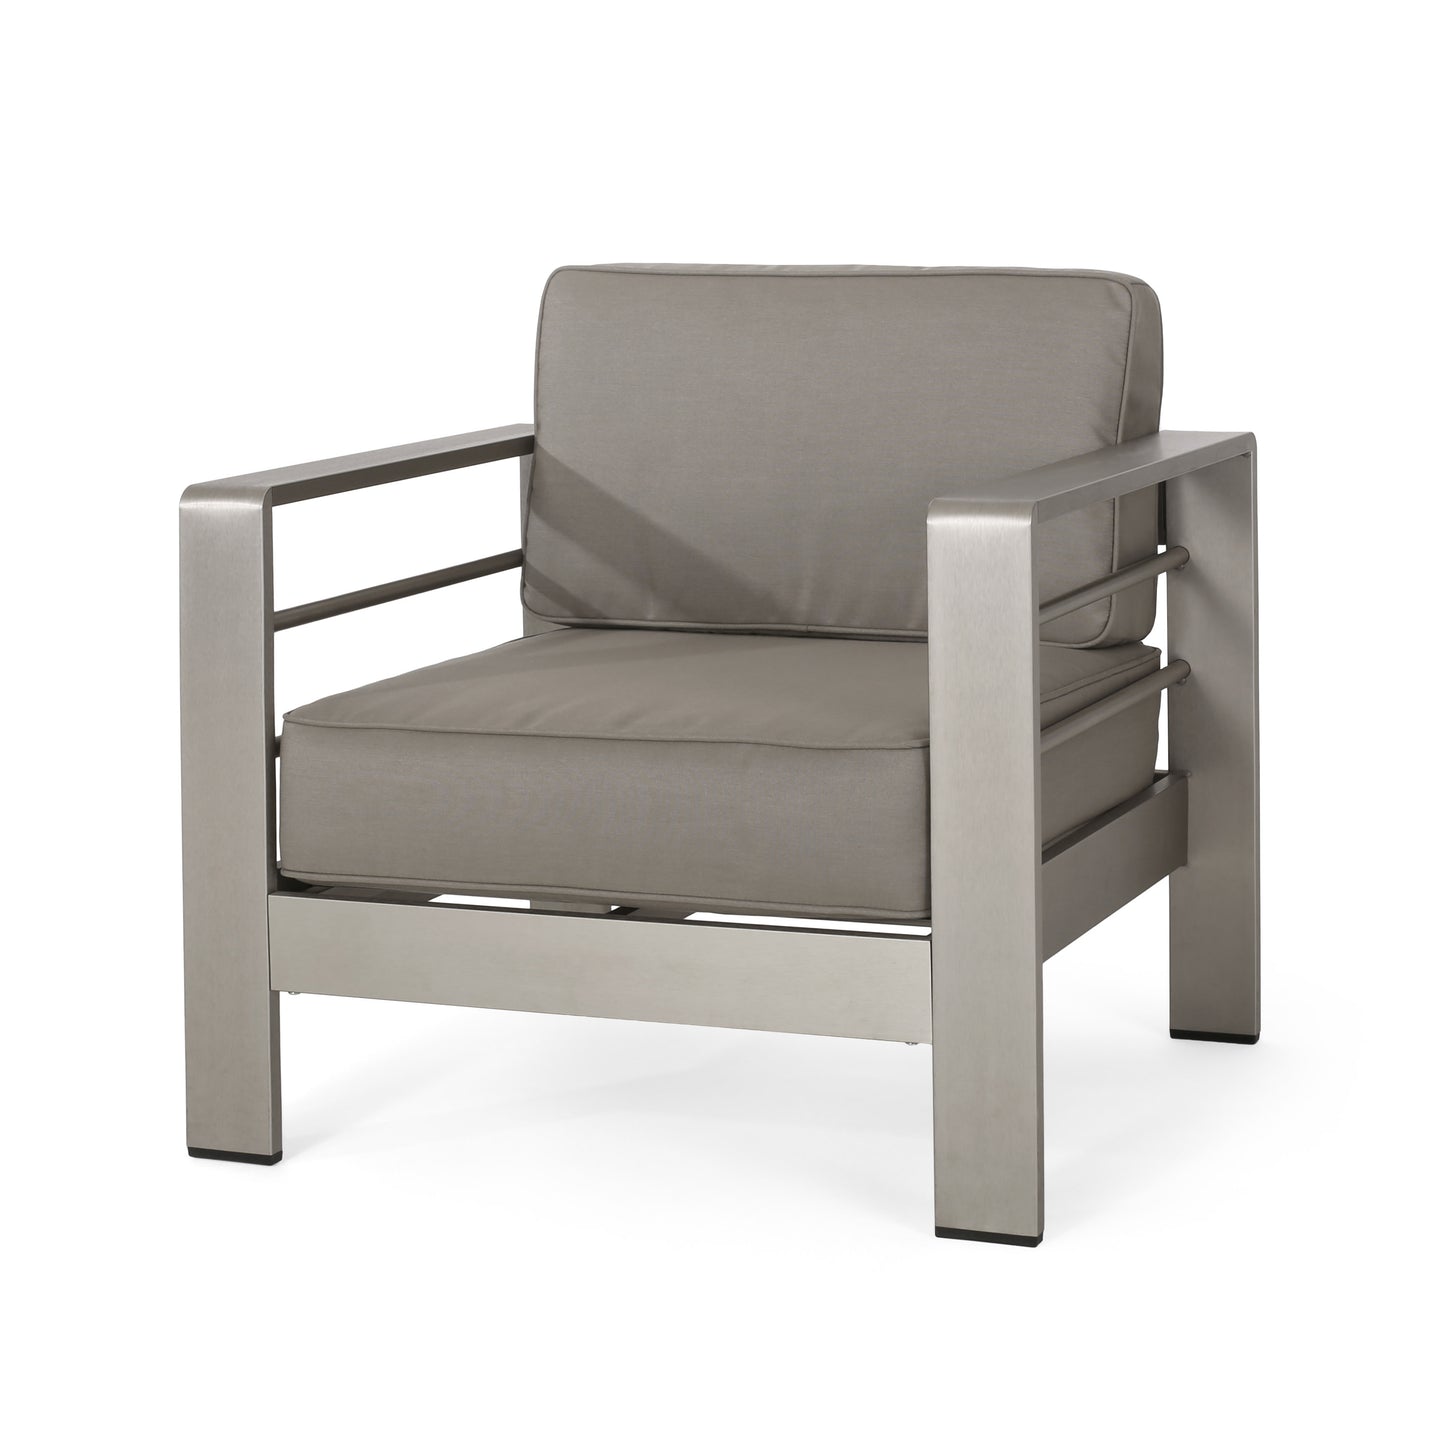 Crested Bay Outdoor Aluminum Club Chair with Optional Sunbrella Cushions